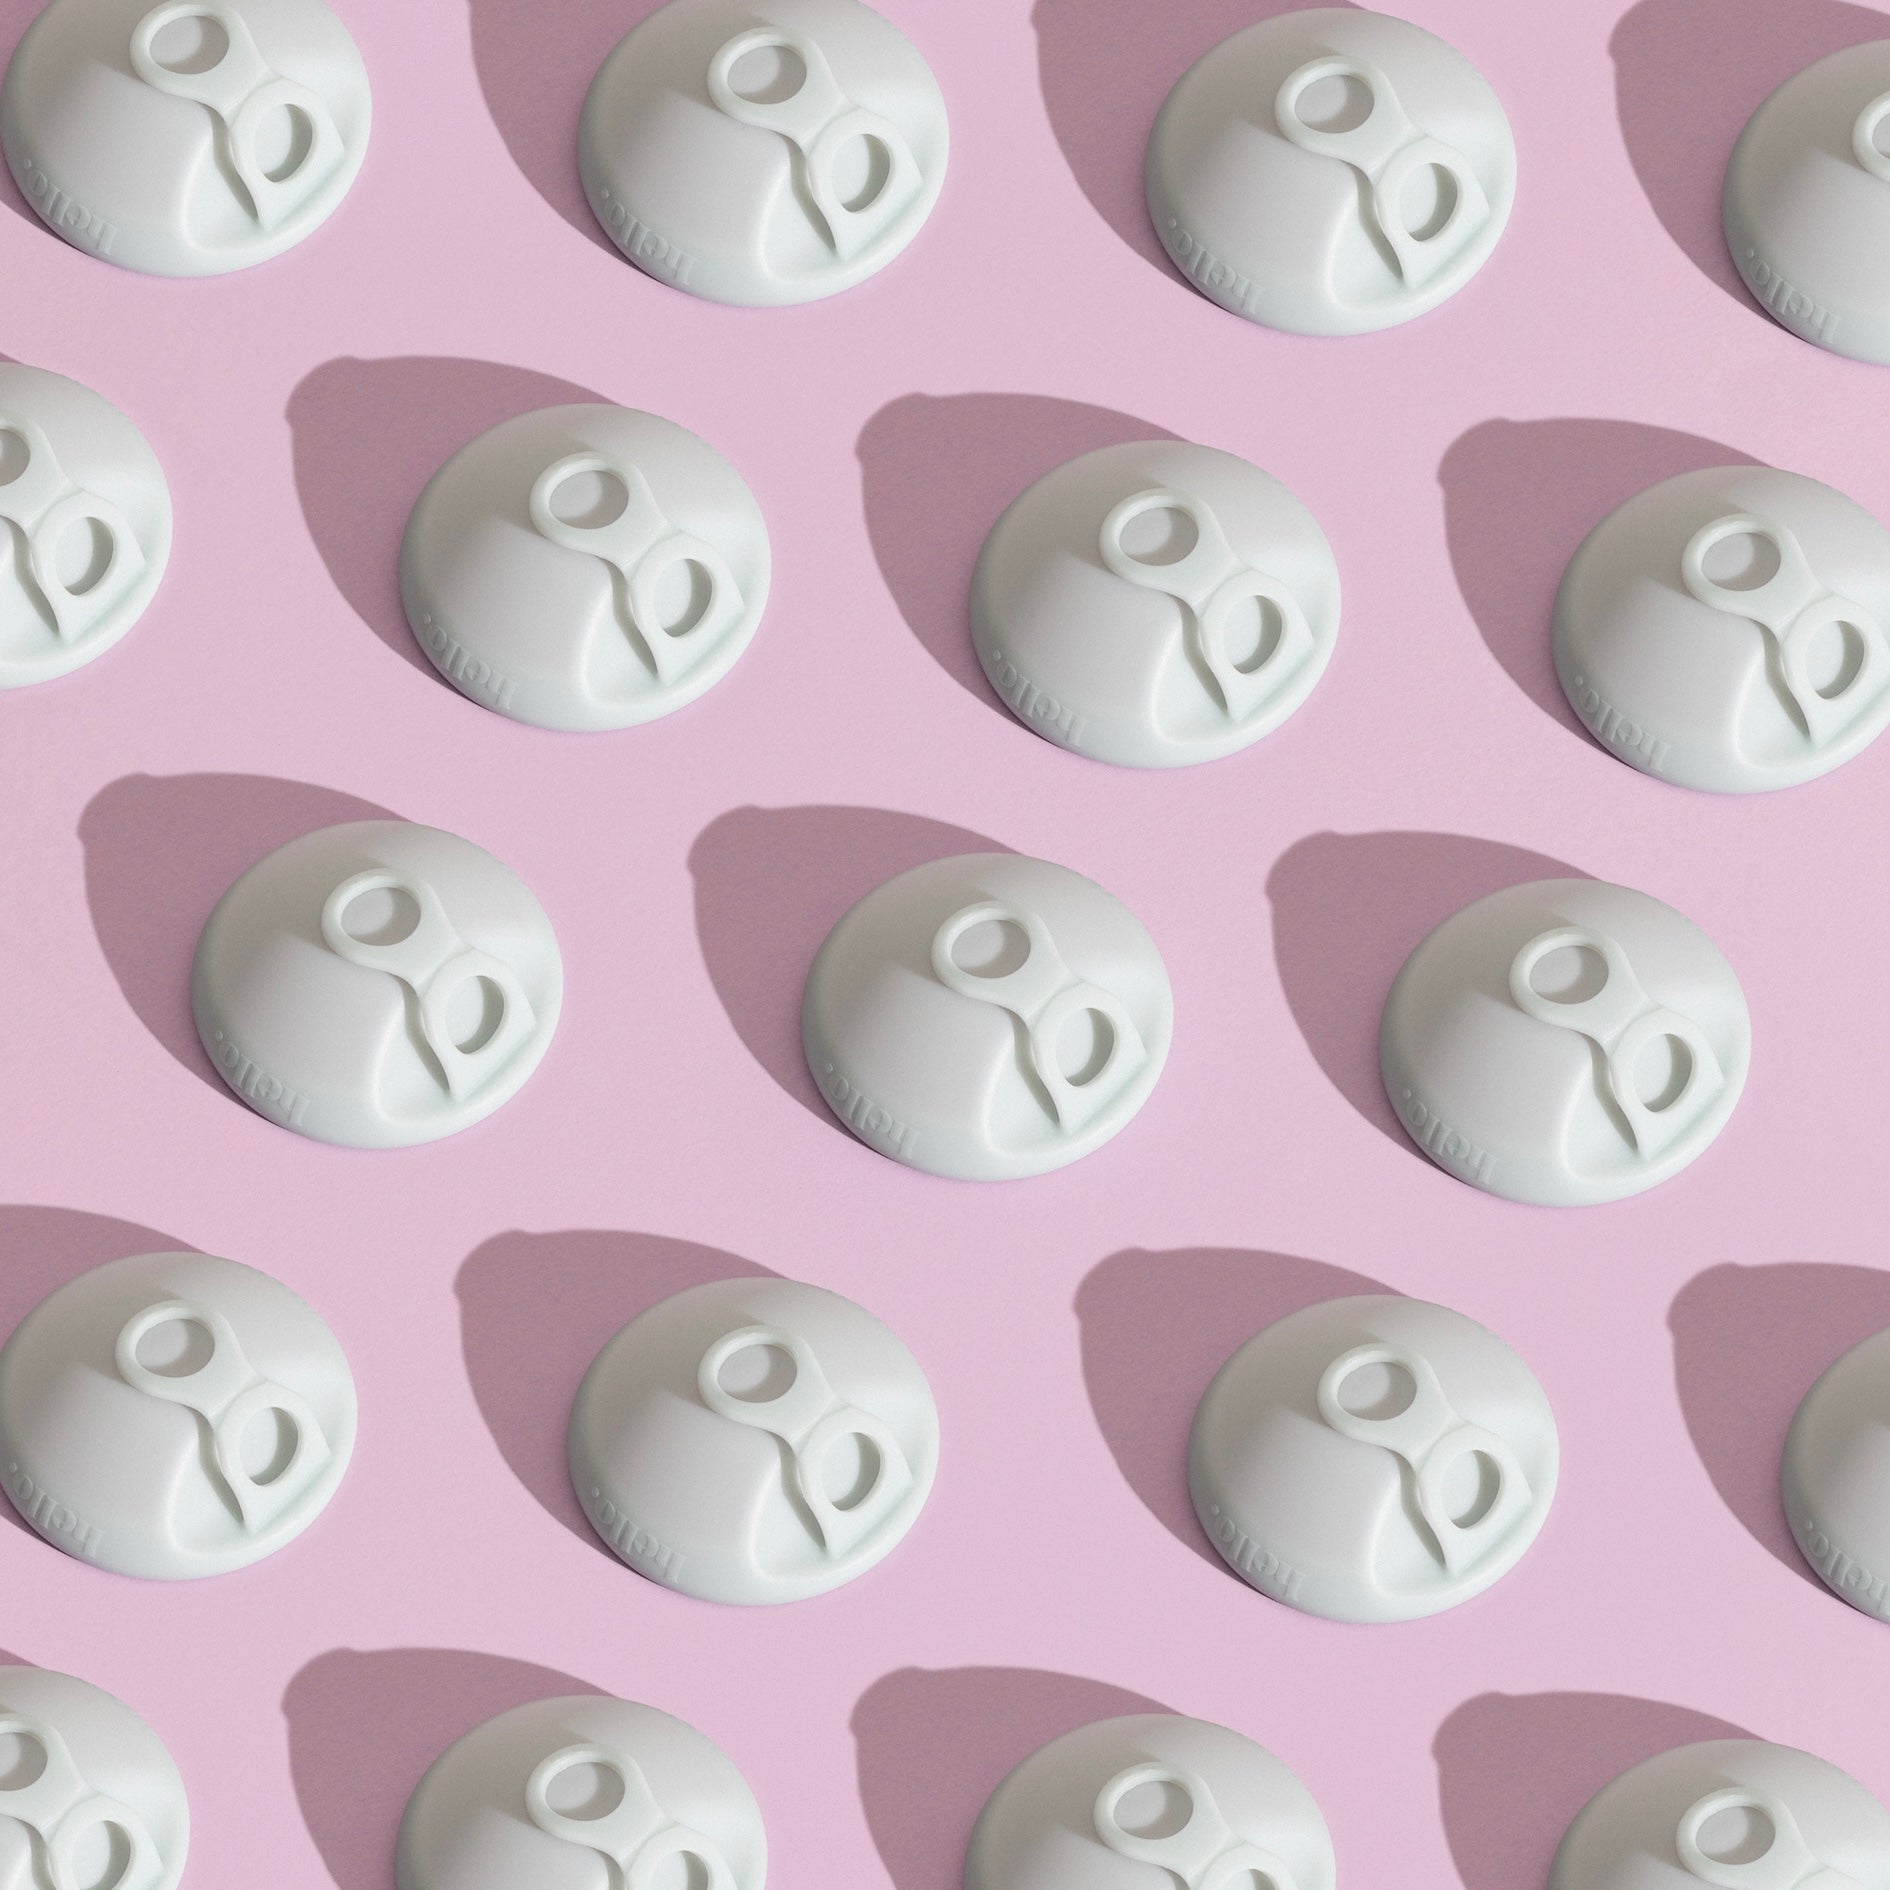 Your One-Stop Period Guide: What is your period telling you